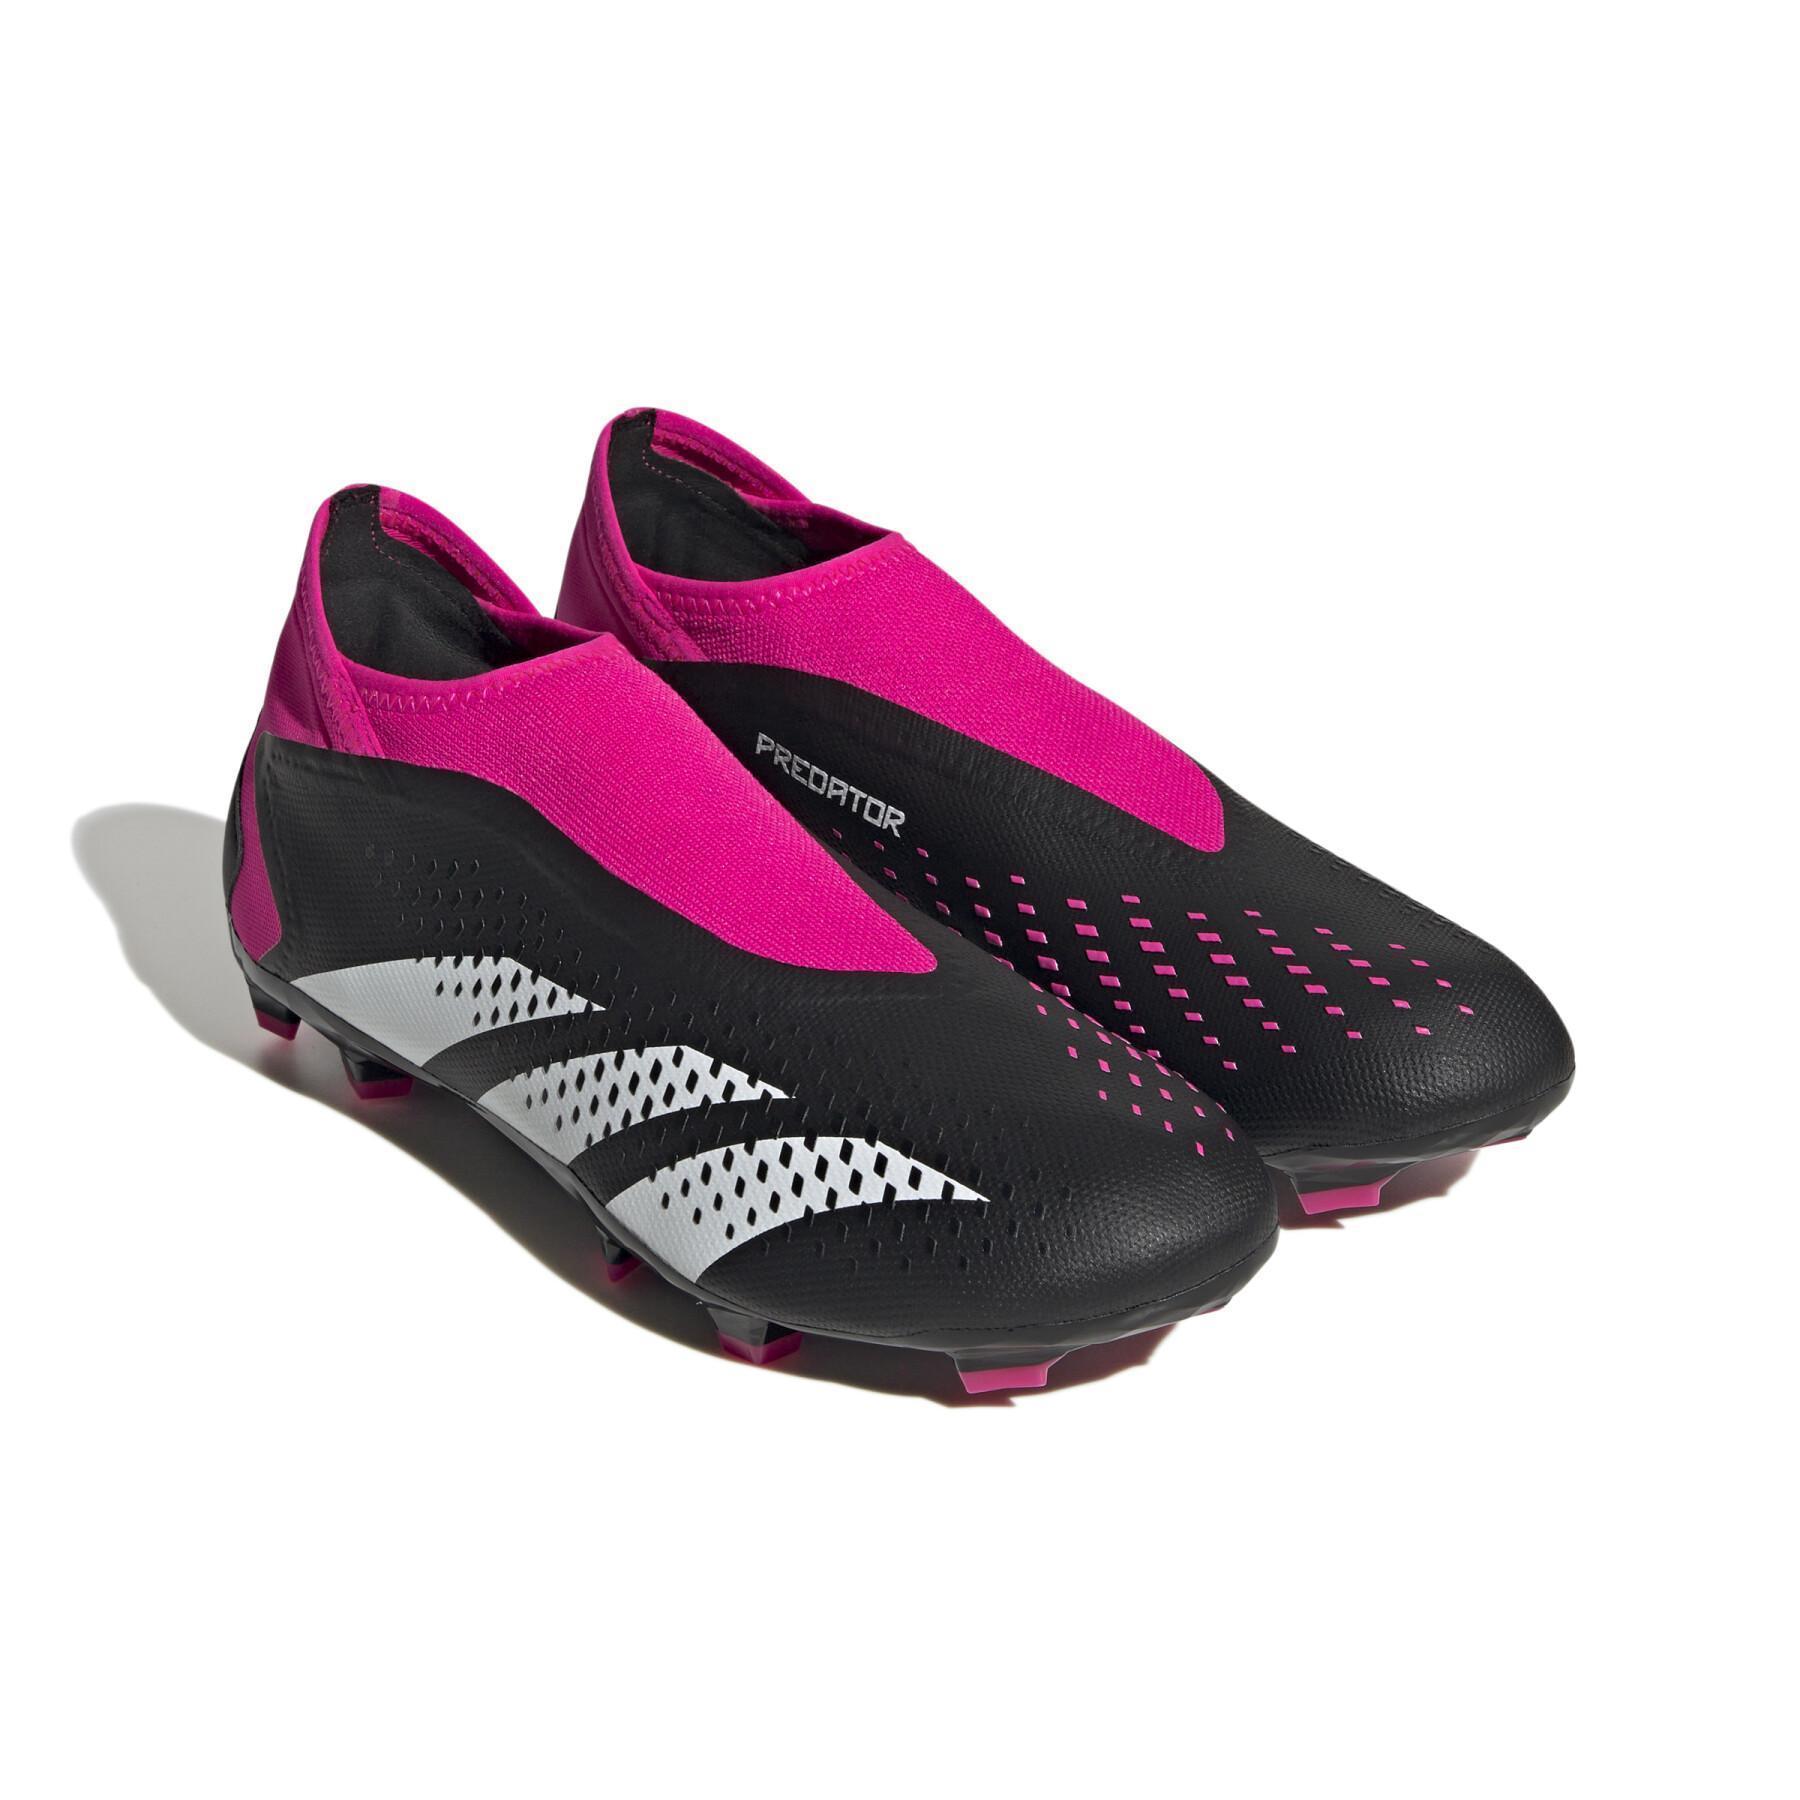 Chaussures de football sans lacets adidas Predator Accuracy.3 - Own your Football